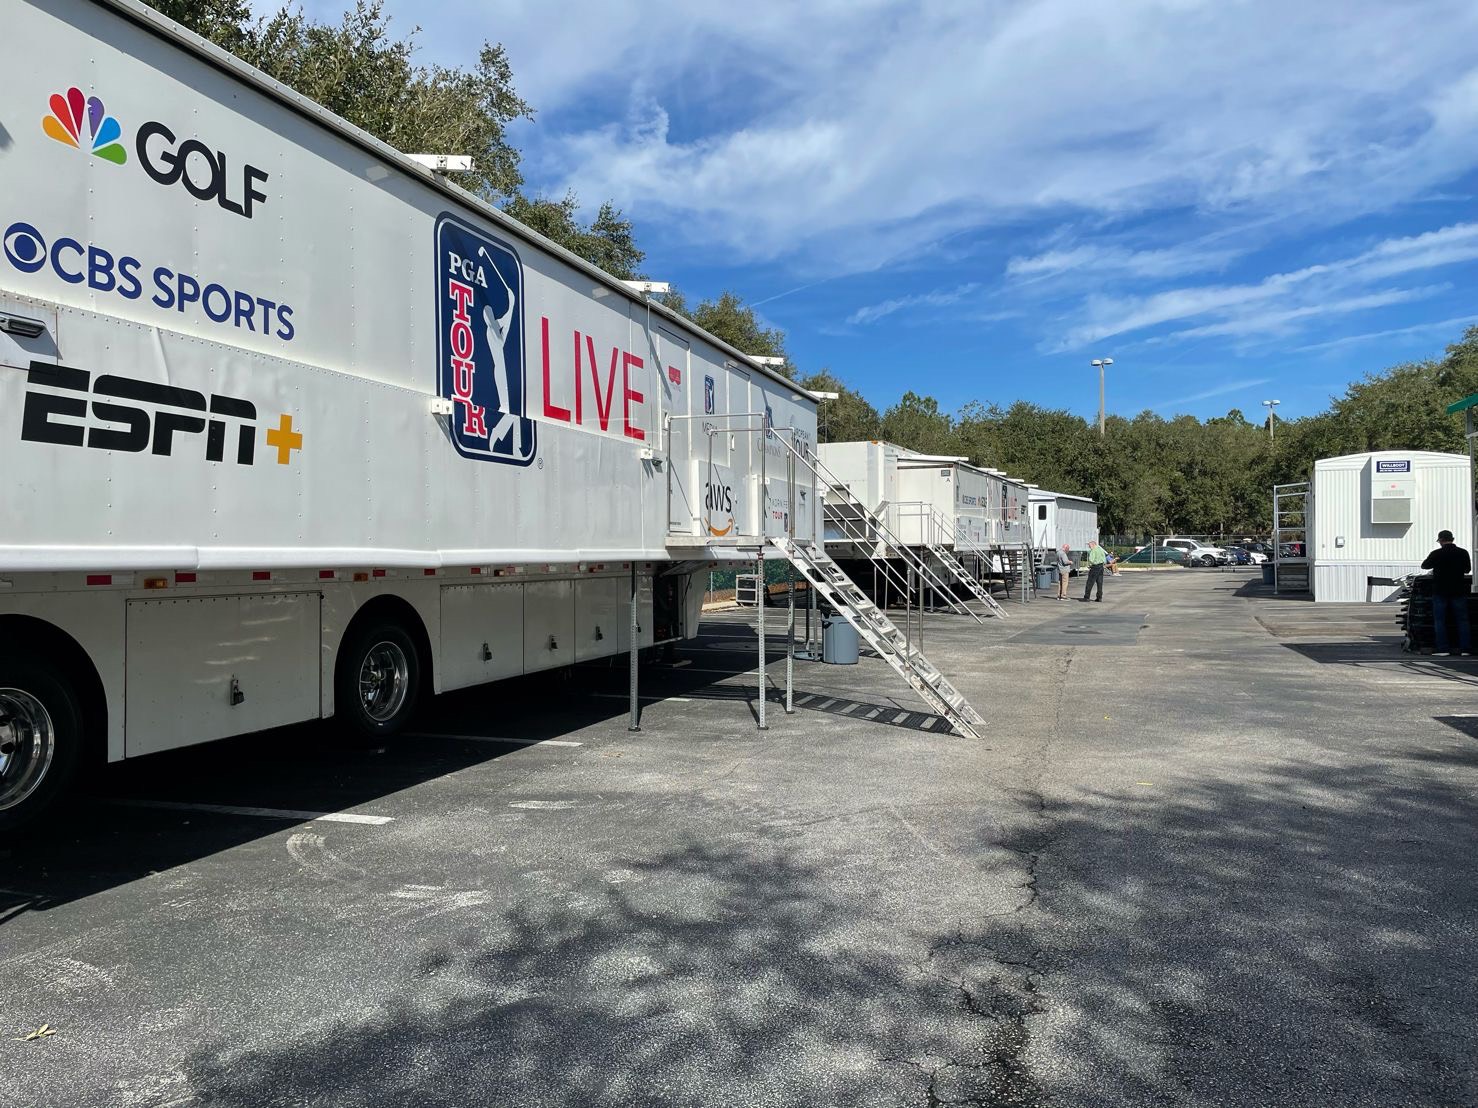 It’s a New Era for CBS Sports Golf as PGA TOUR Takes Over Onsite Facilities